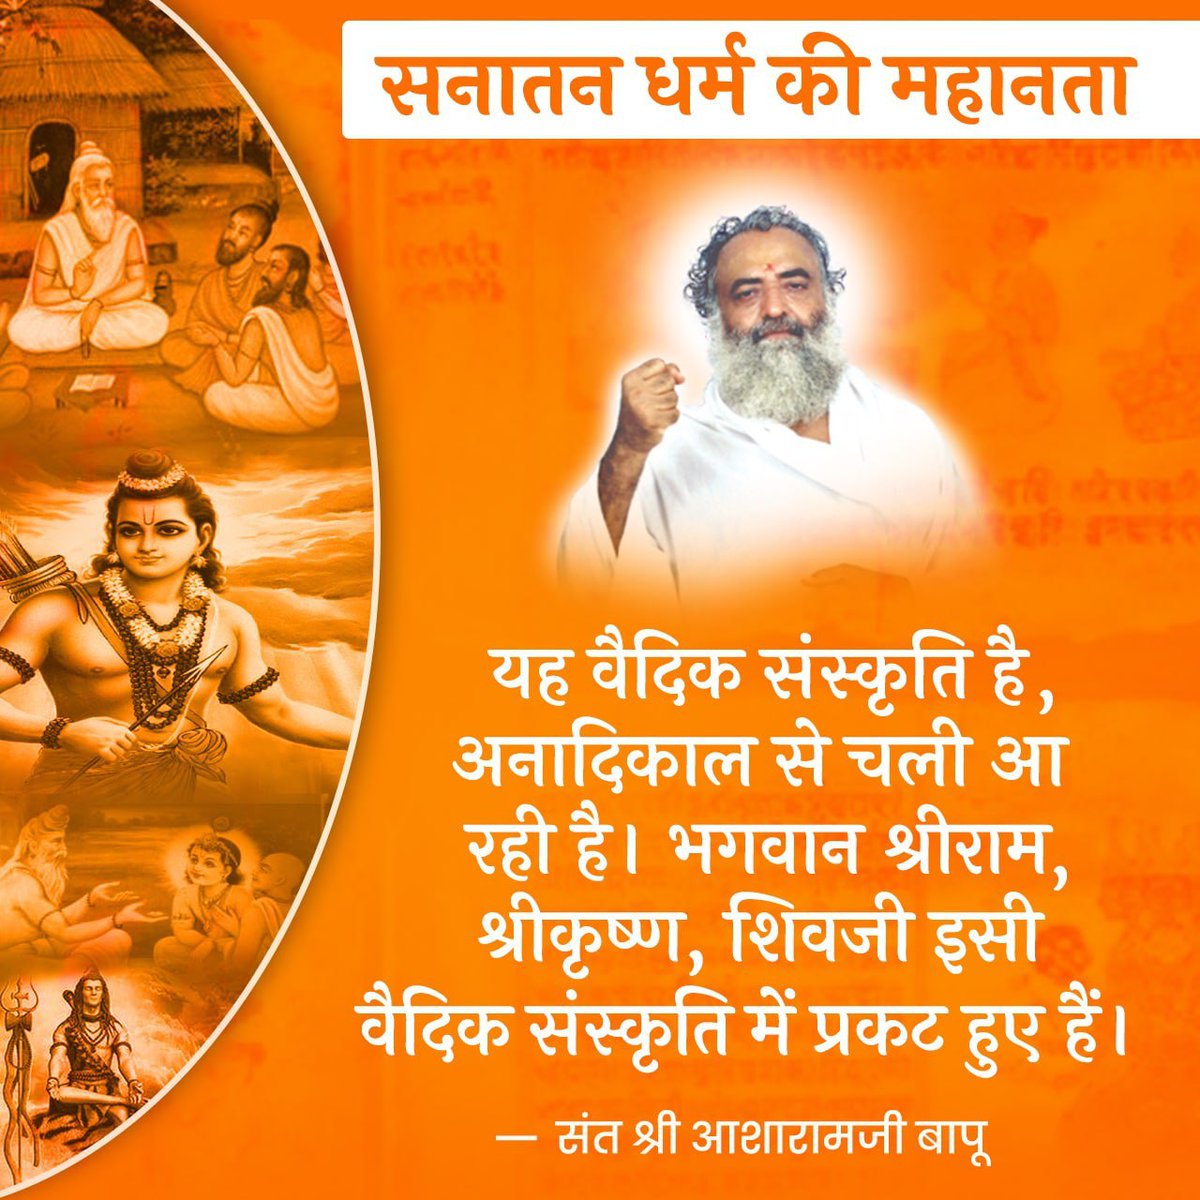 Sant Shri Asharamji Bapu, the protector of Sanatan Dharma, saved lakhs of Hindus from religious conversion, Bapu started celebrating parents worship day  on 14th February and Tulsi Pujan Diwas on 25th December.#सनातन_संवाहक Bapuji 
 brought cultural revolution.